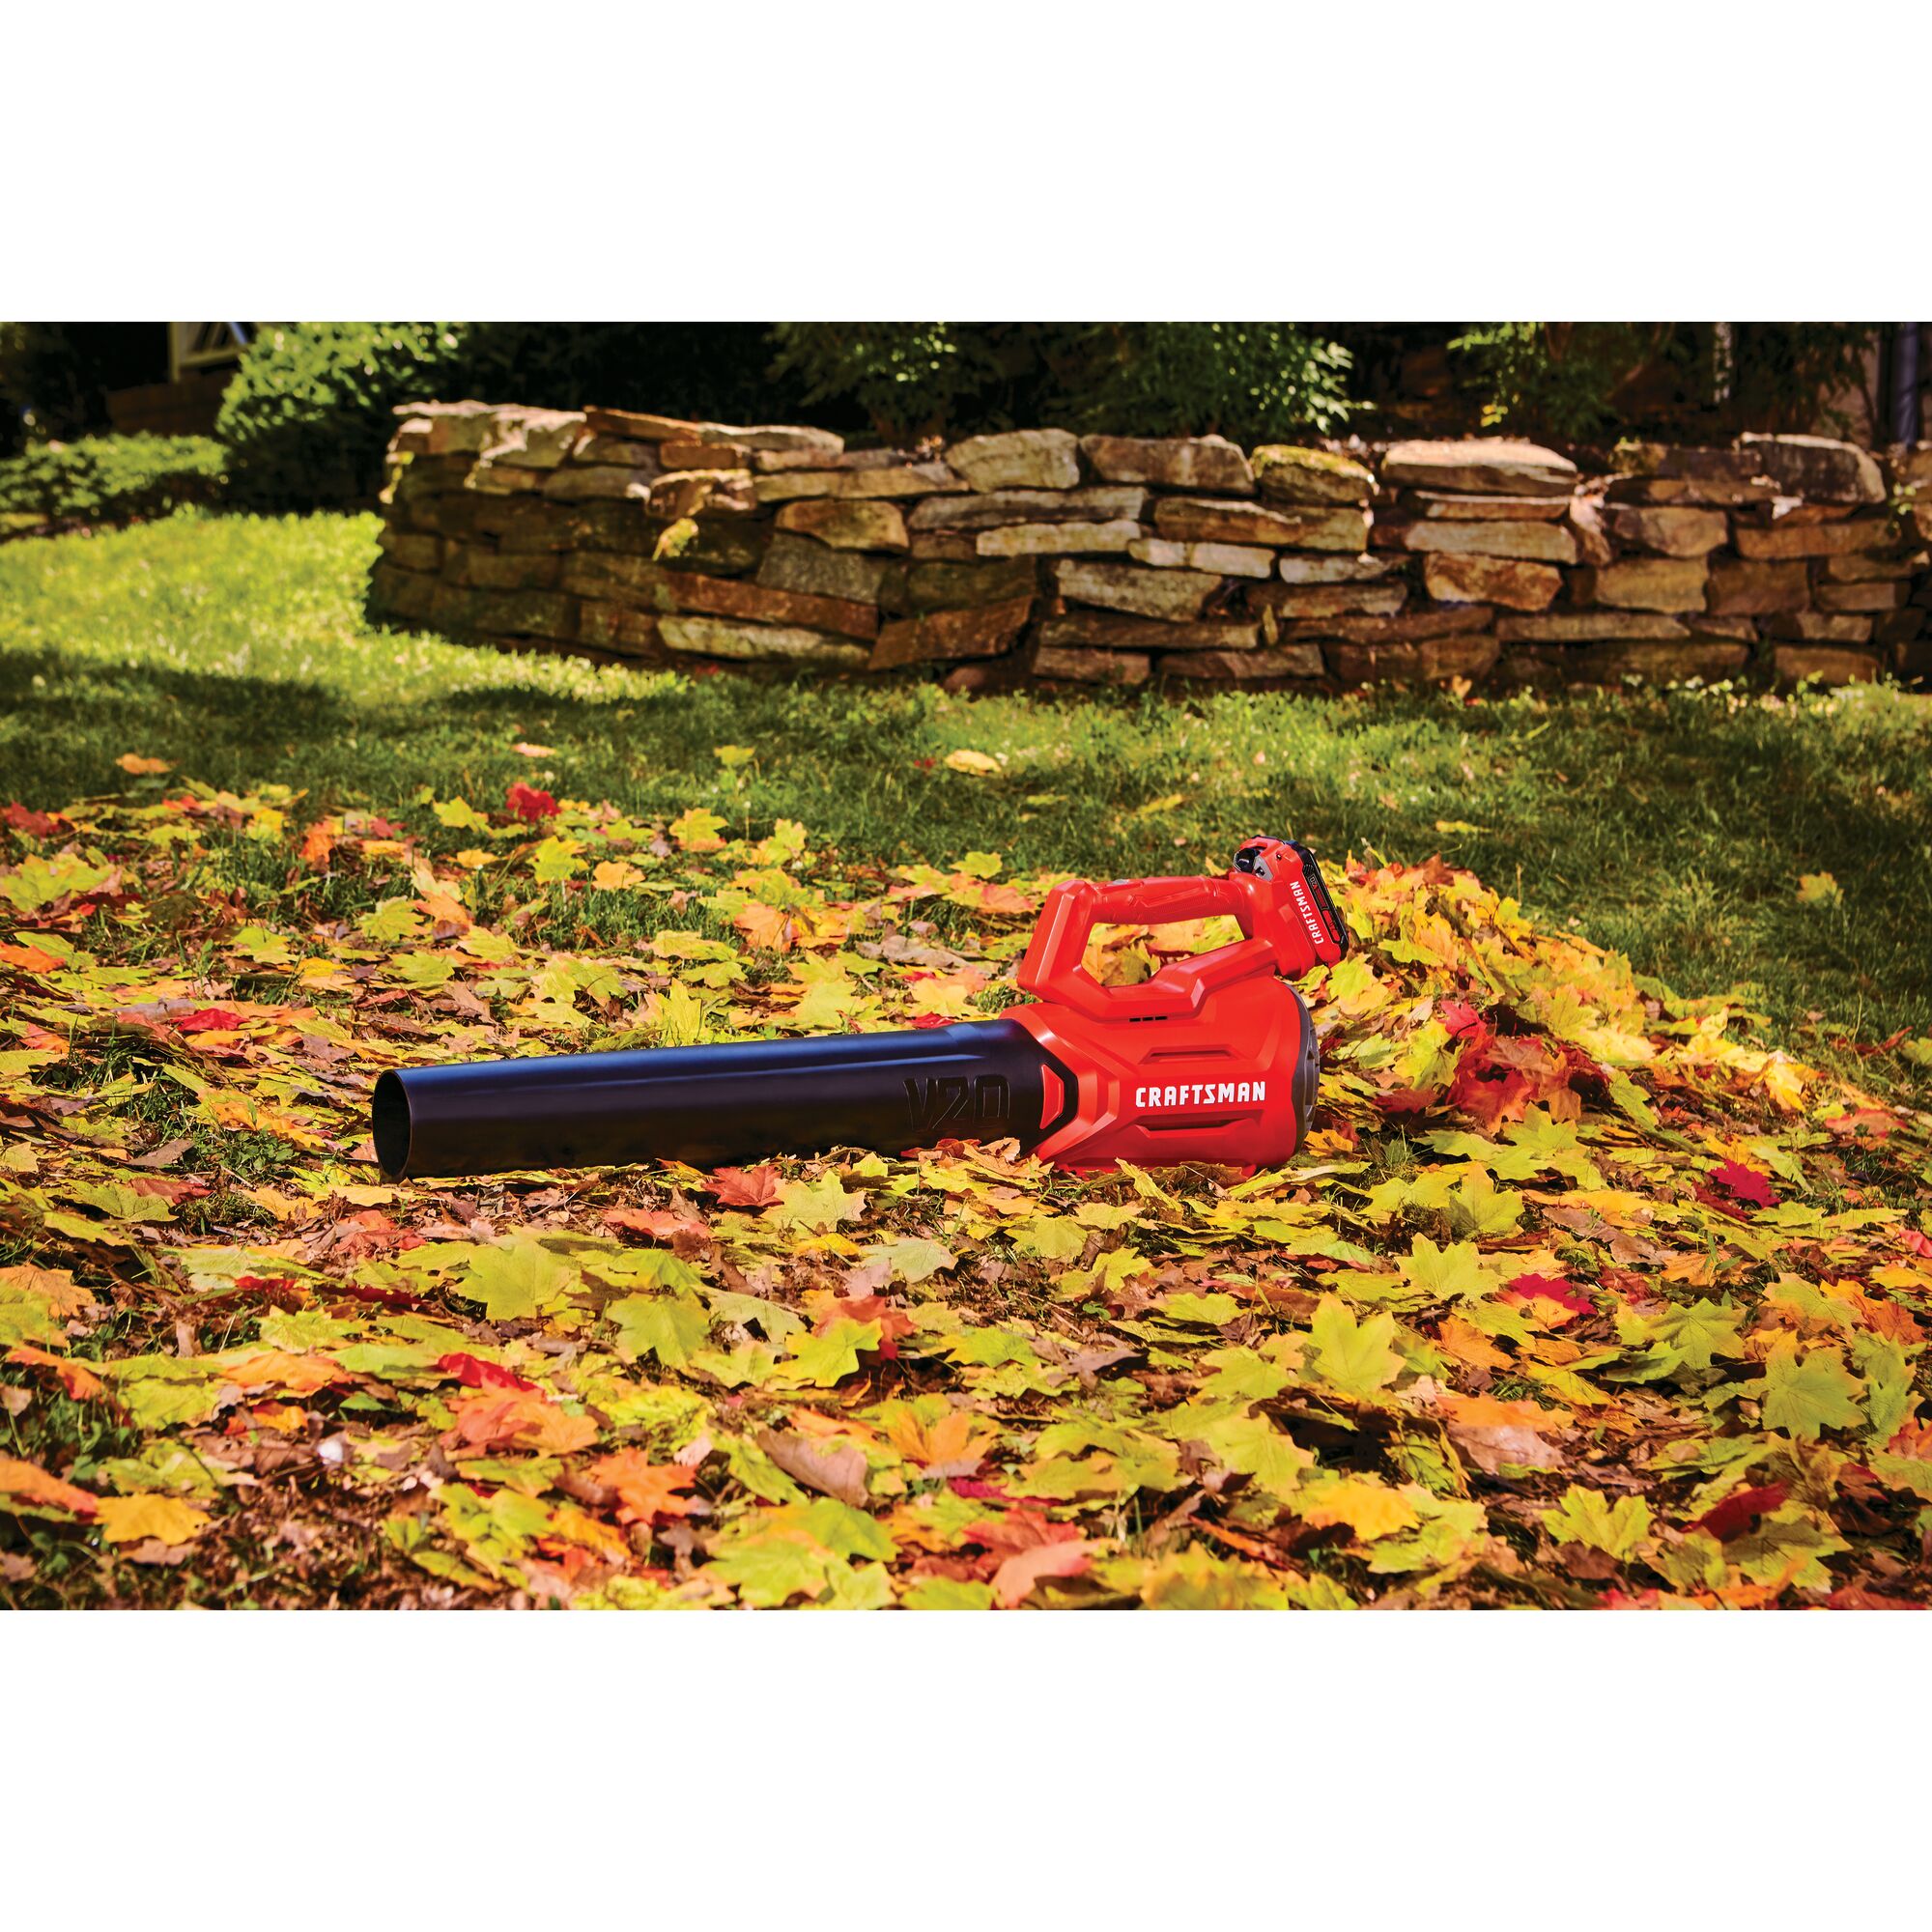 Cordless axial leaf blower kit 2 amp hour placed in lawn.